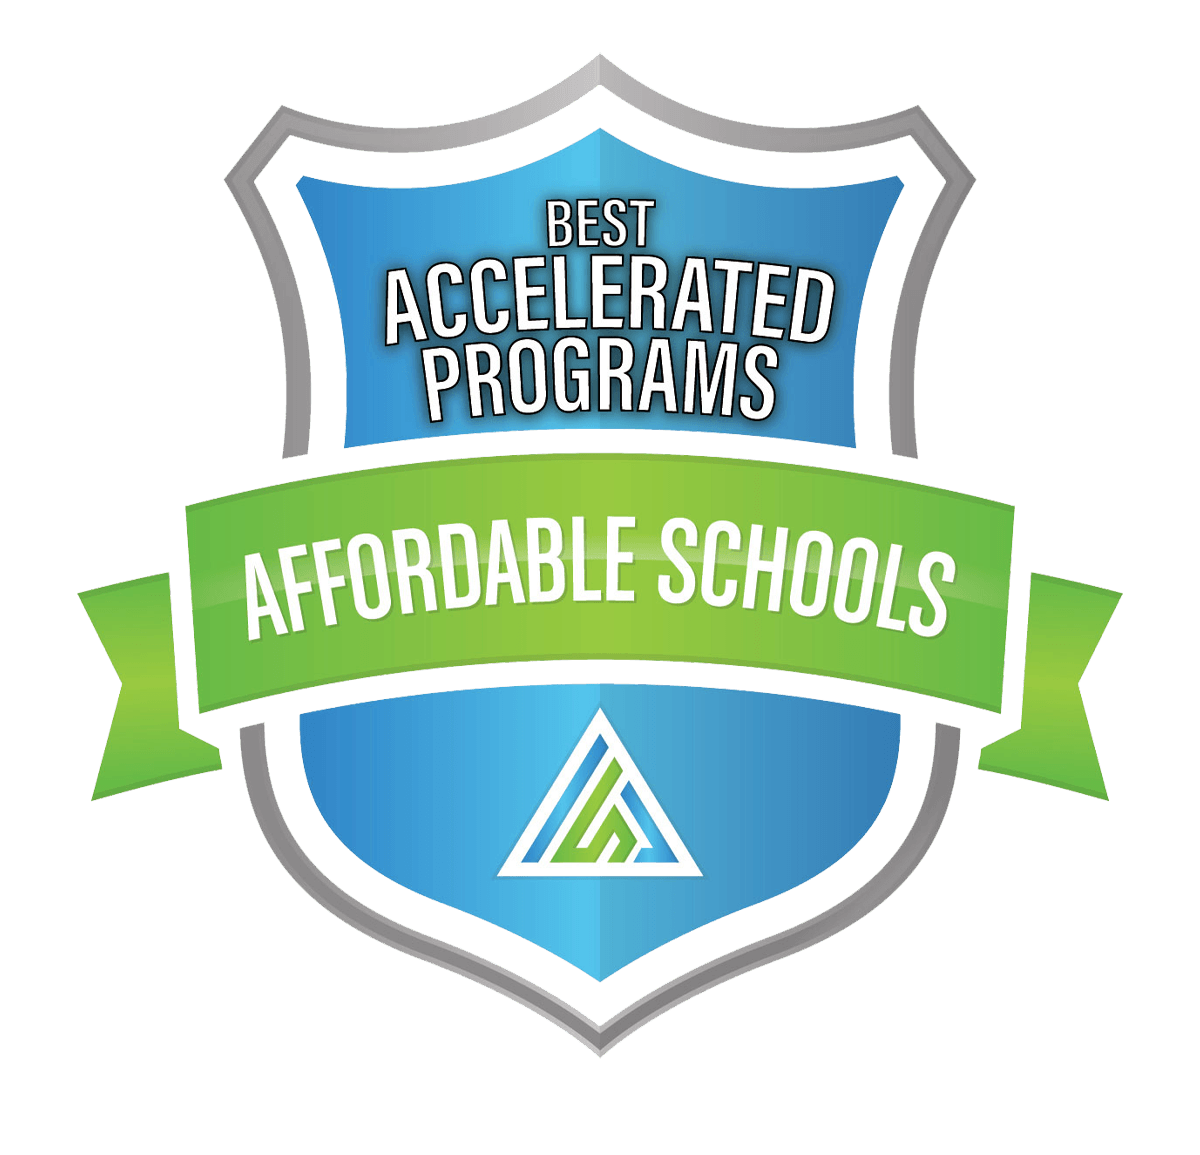 40-best-affordable-accelerated4+1-bachelor’s to master’s degree programs 2020